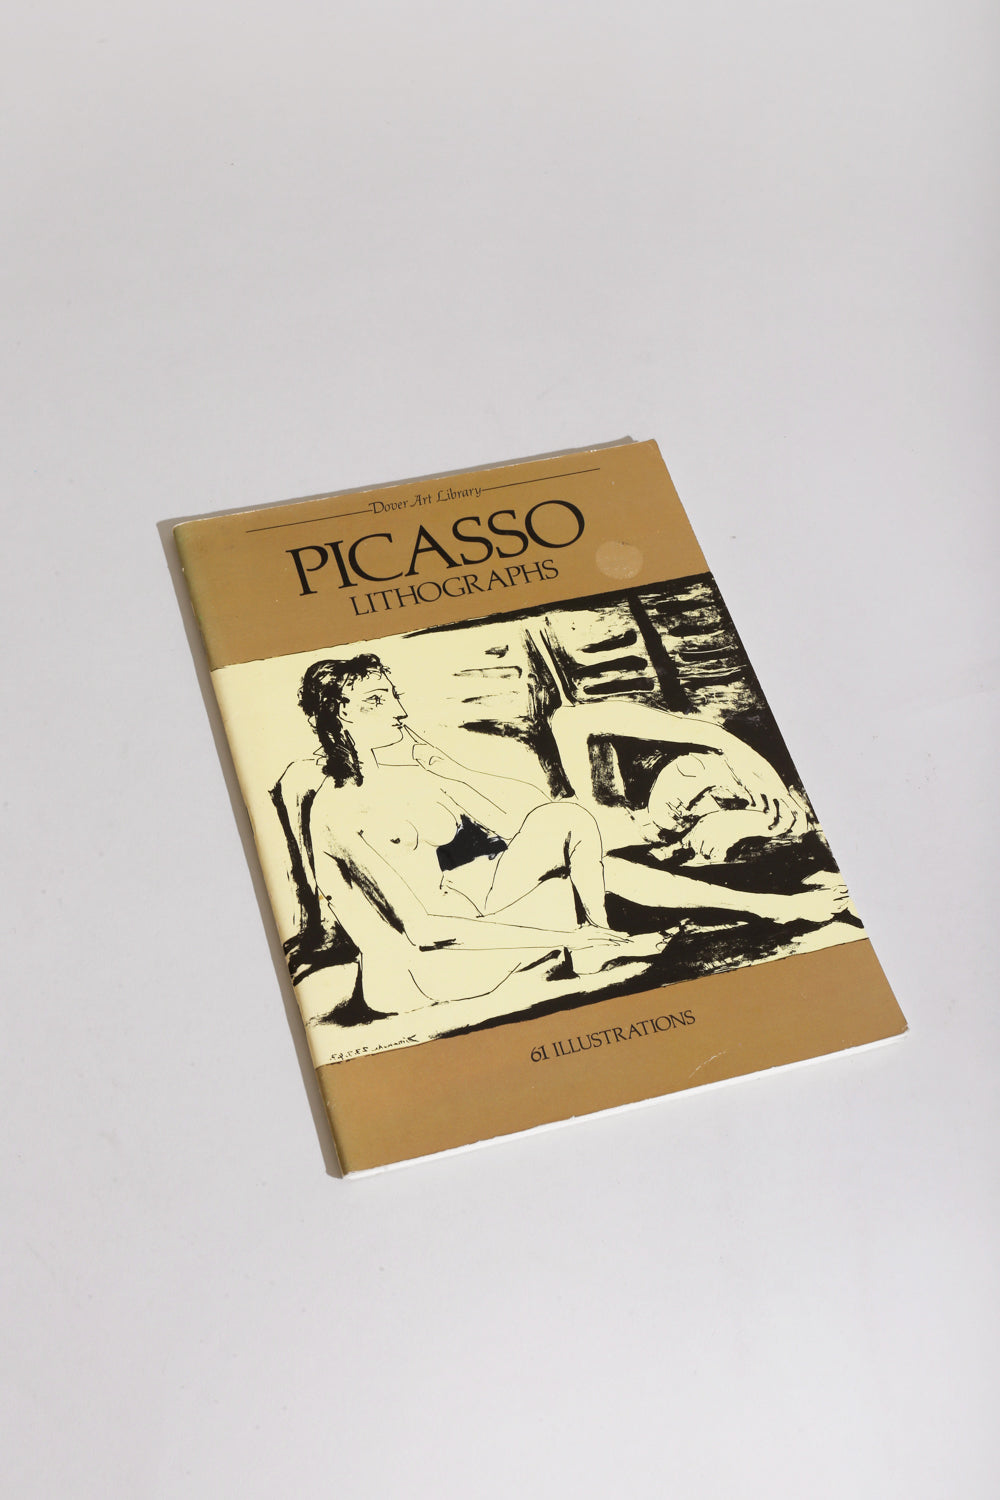 Lithographs by Picasso Book